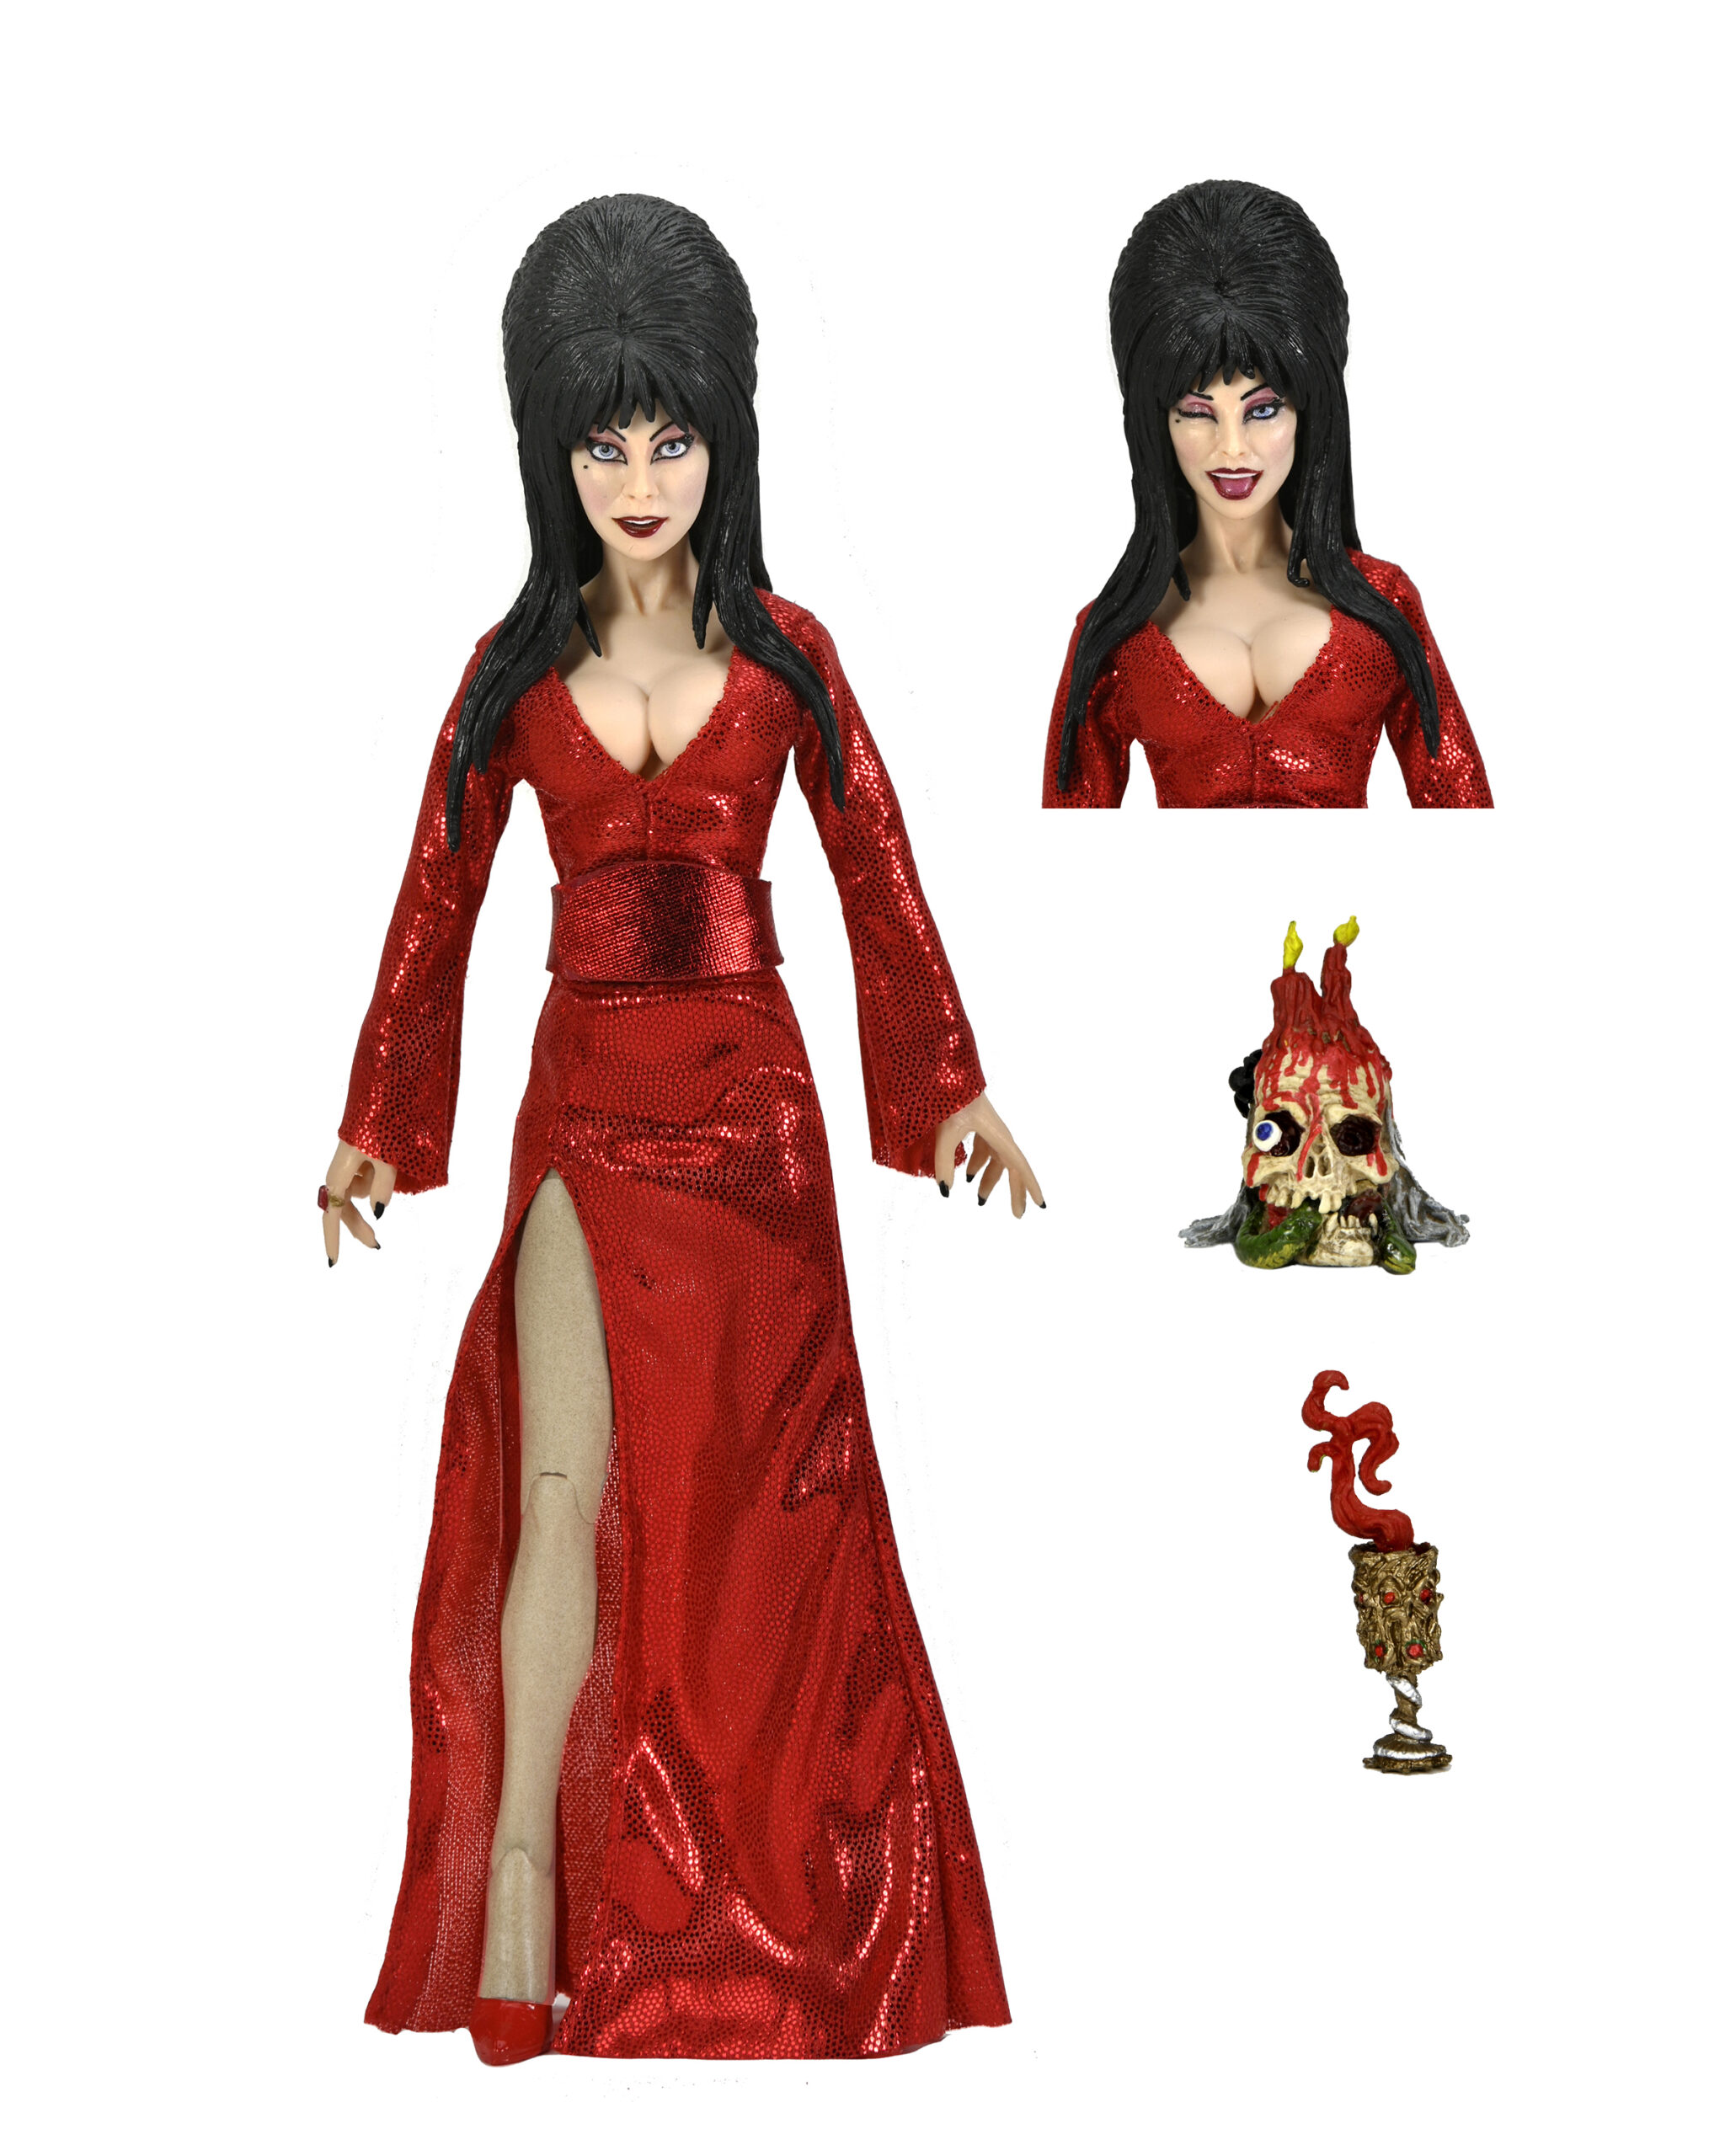 Elvira – 8” Clothed Action Figure – “Red, Fright, and Boo”